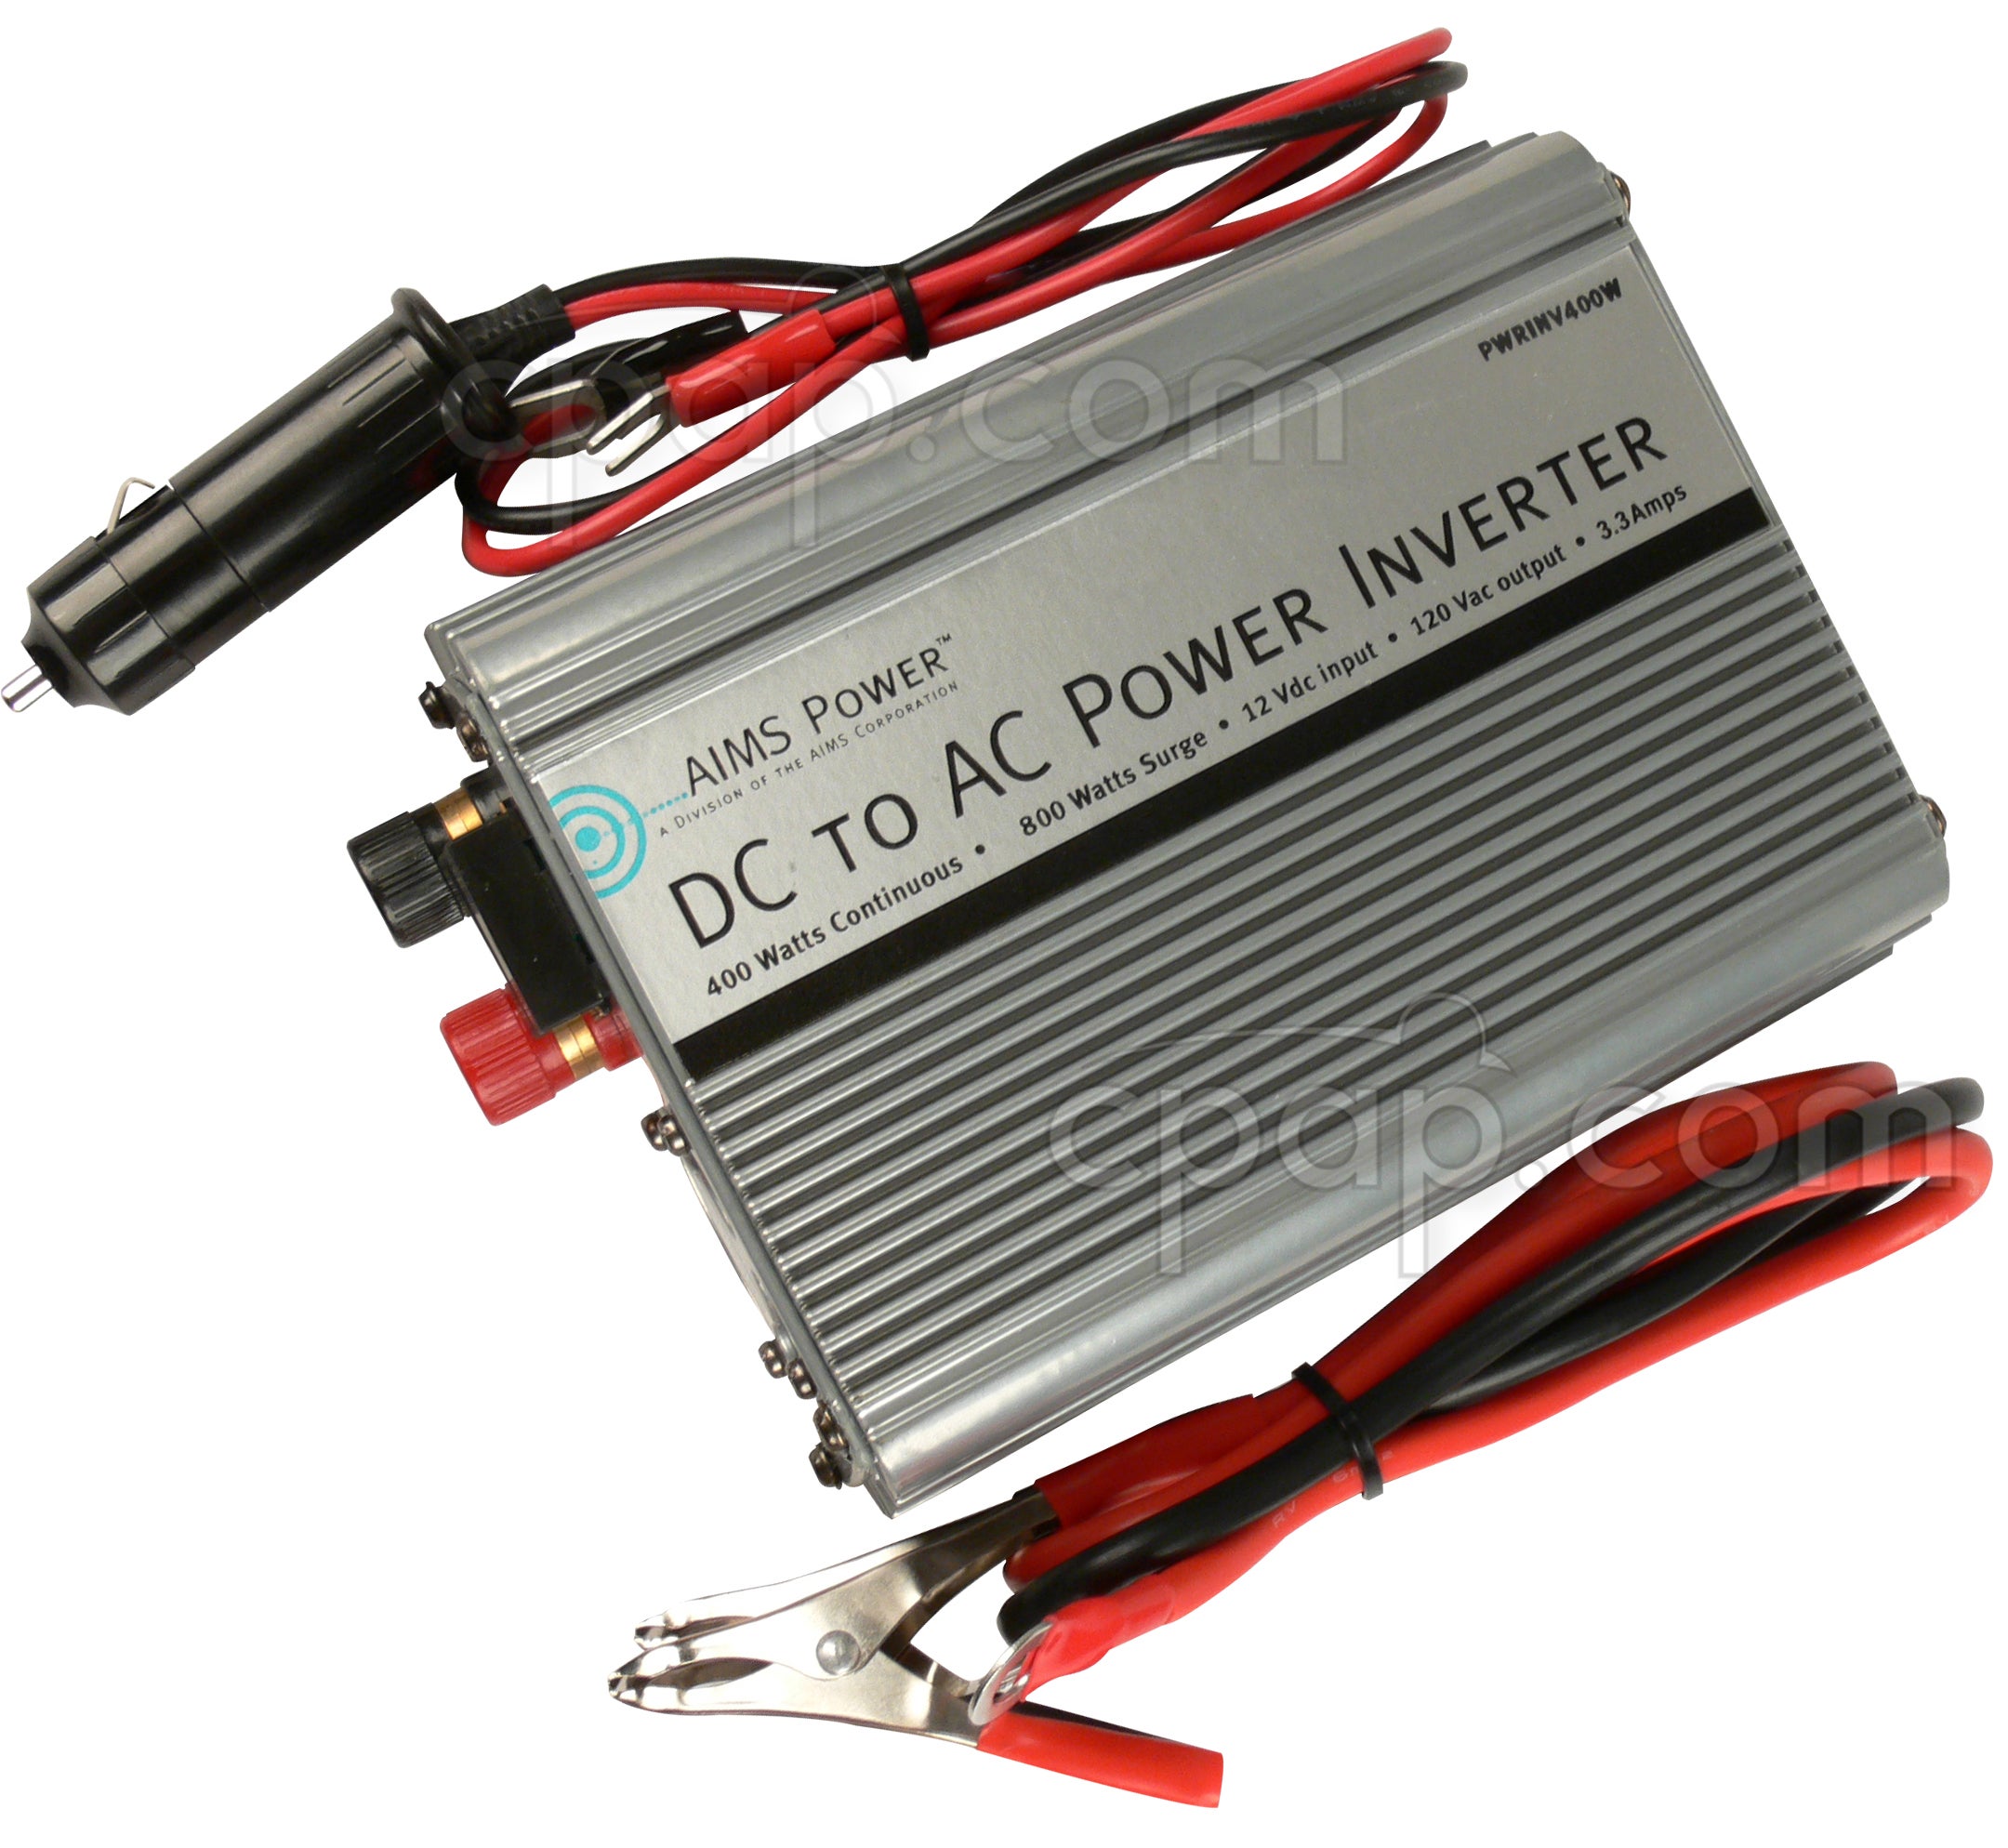 Power inverter cable